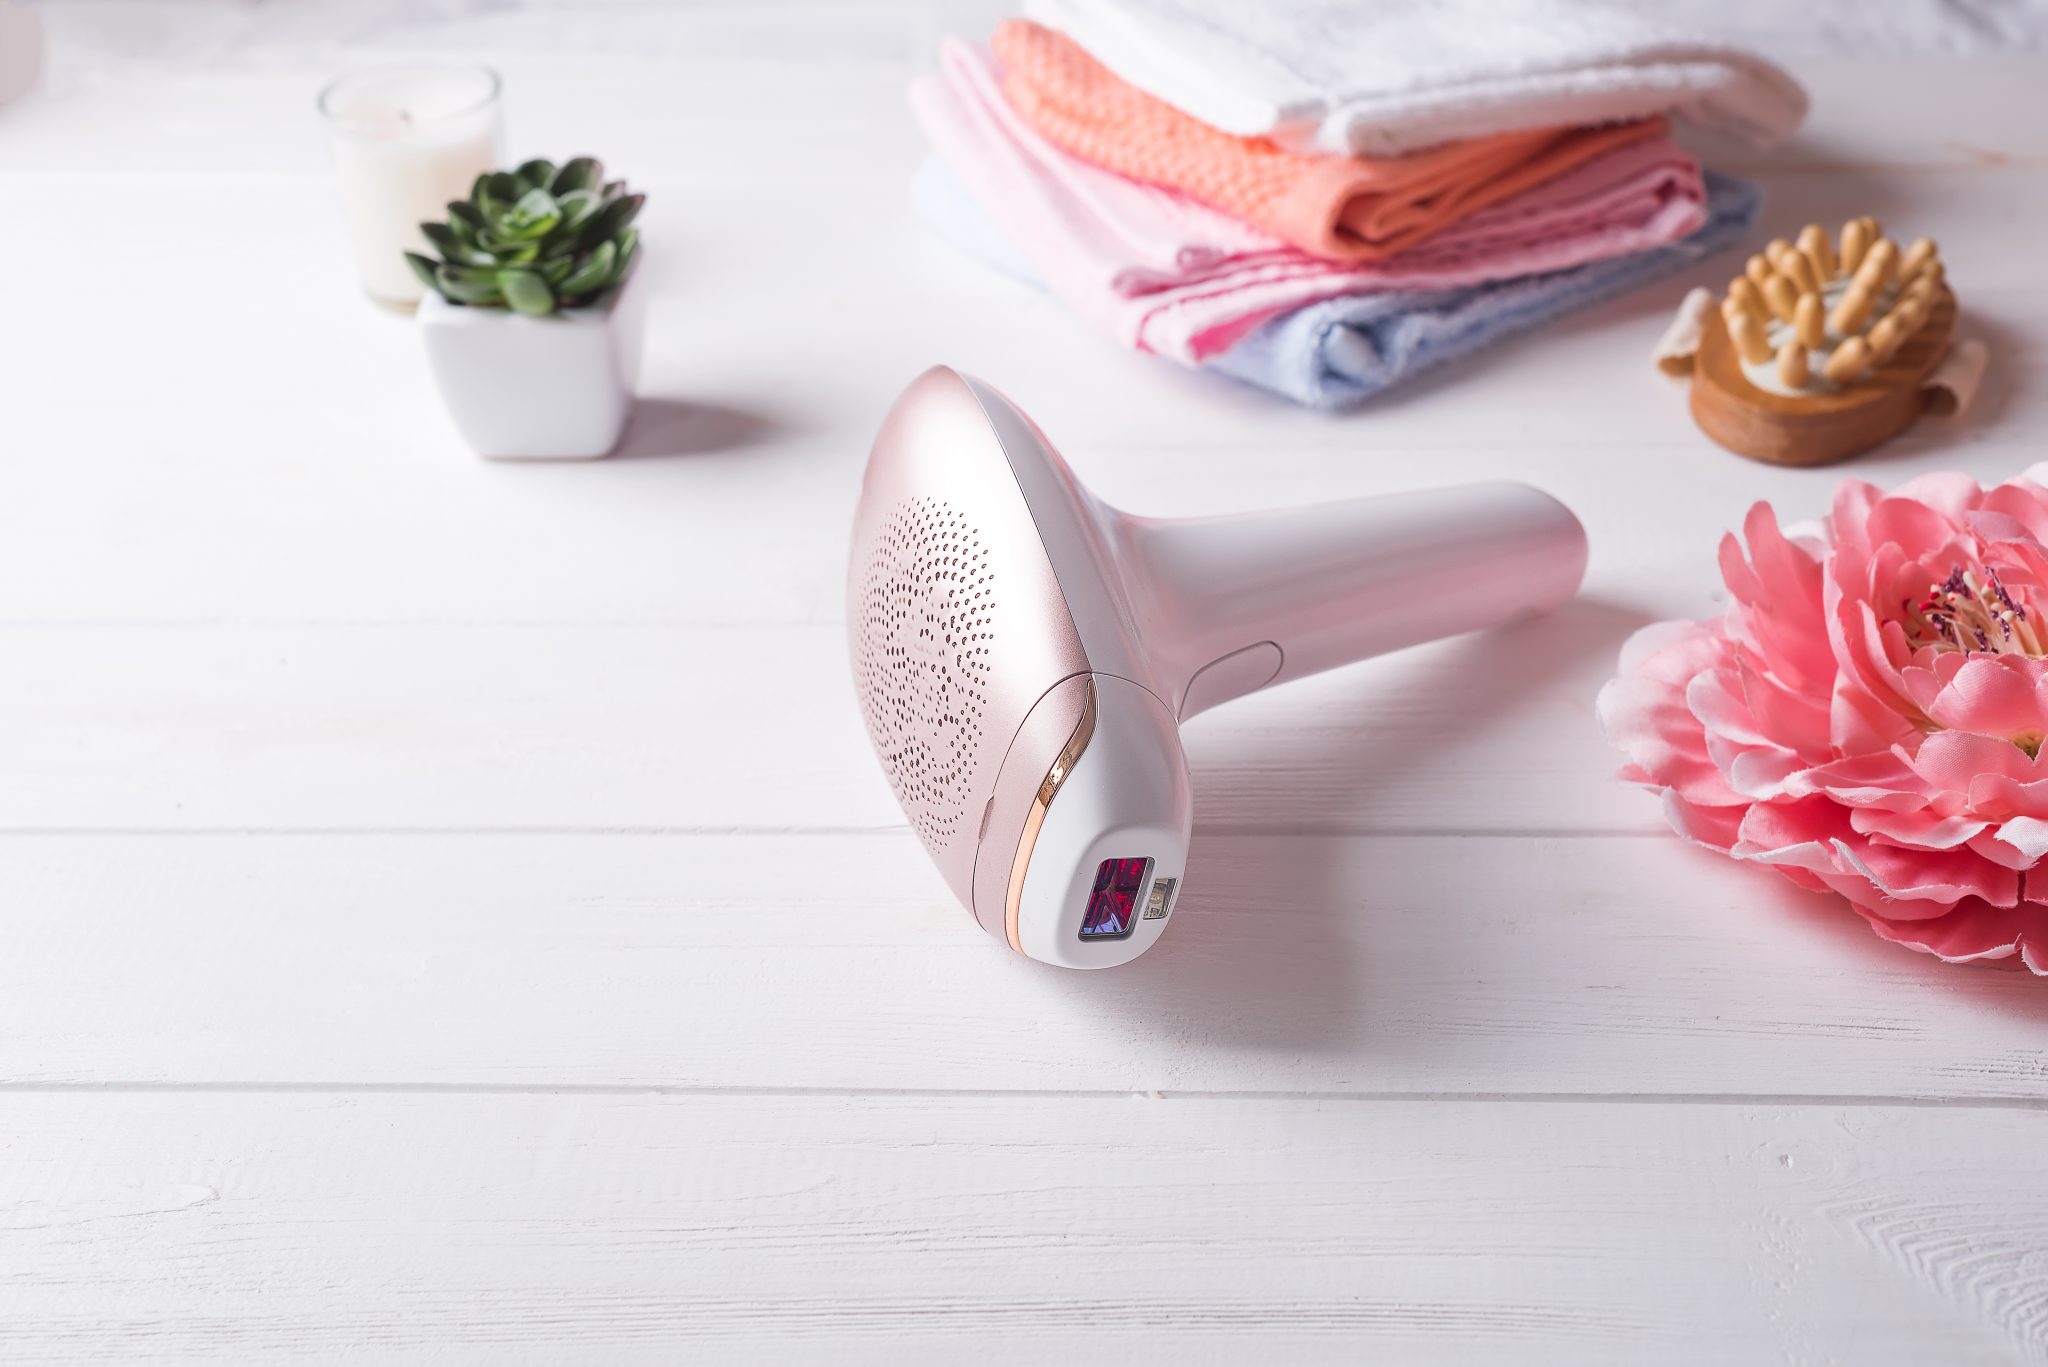 At home hair removal: how to use an IPL device